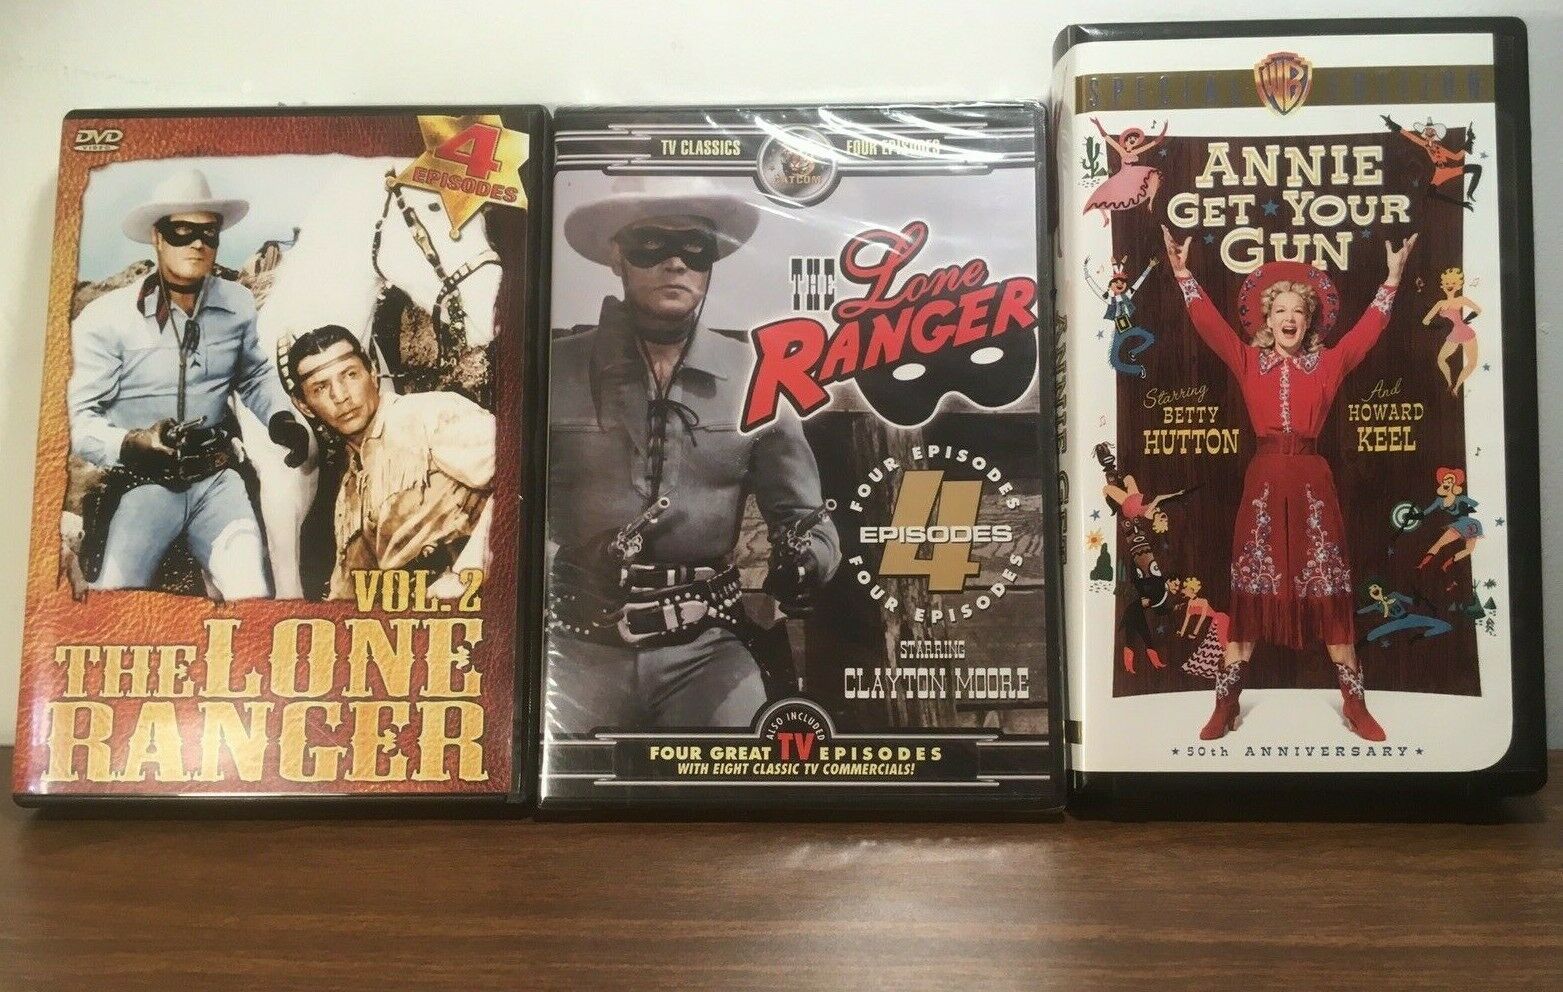 Primary image for The Lone Ranger Vol 2, & 1949 4 TV Ep. CLAYTON MOORE, & Annie Get Your Gun VHS